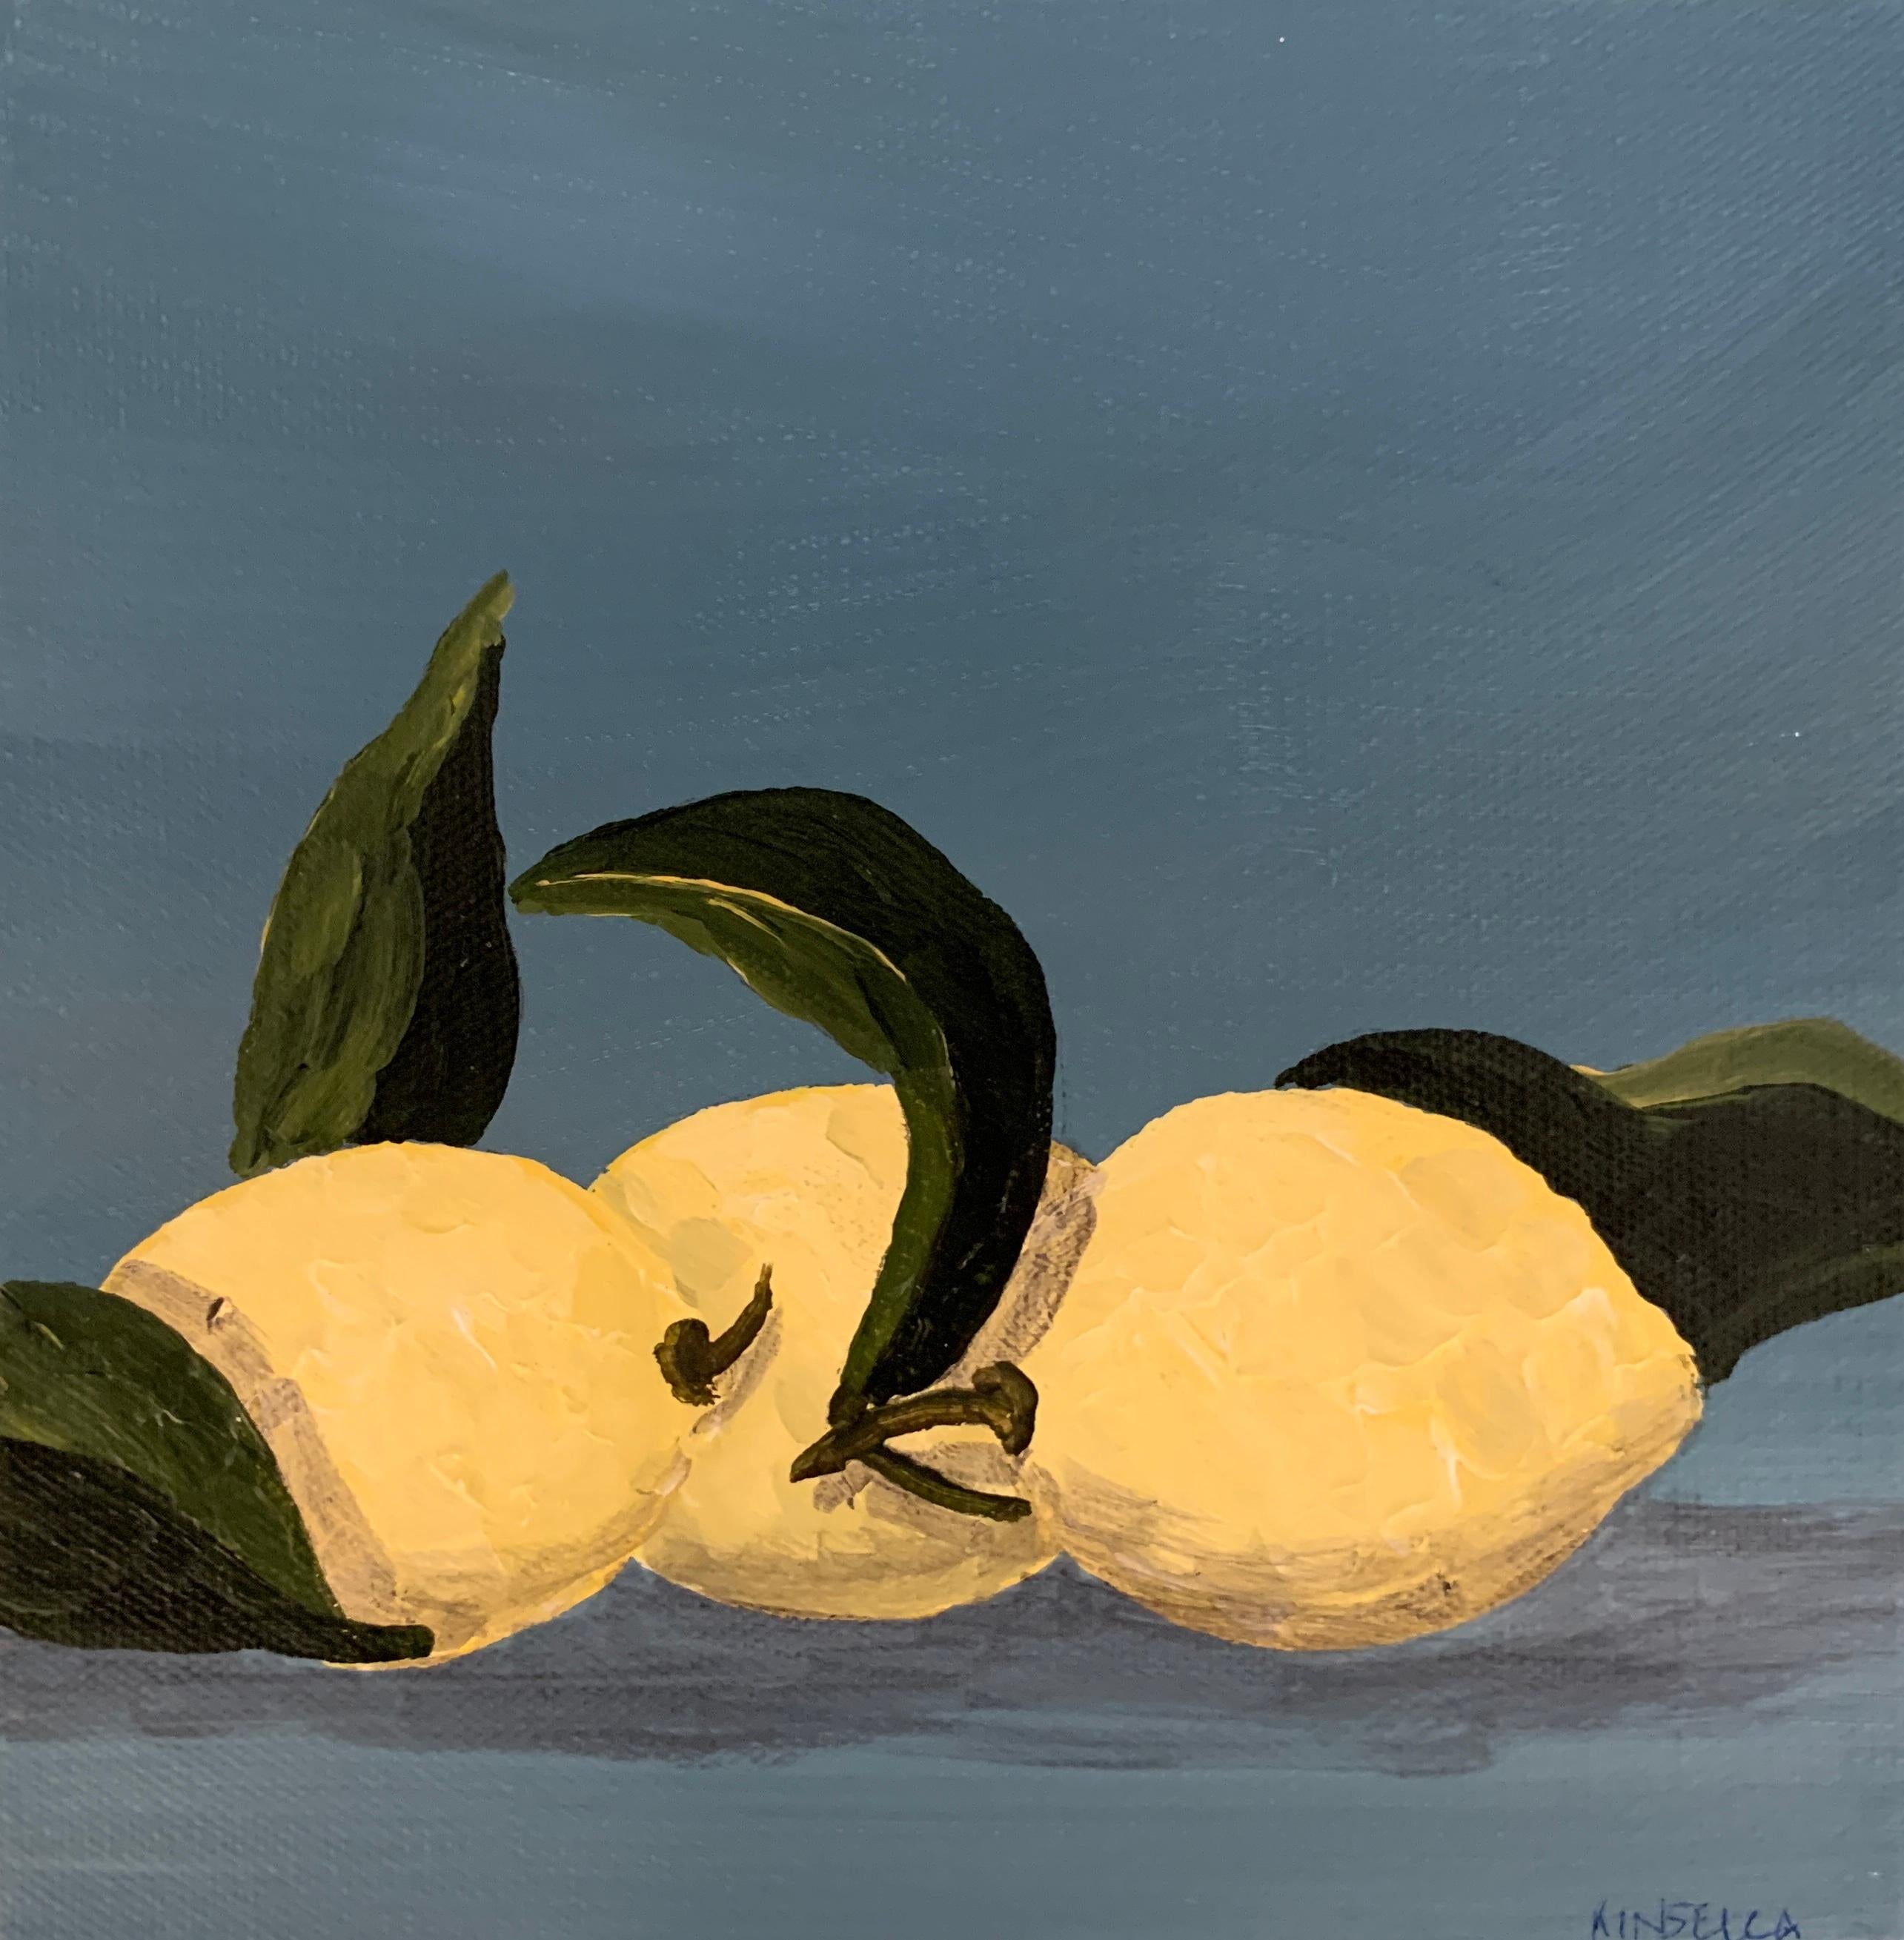 'Lemons IV' is a contemporary acrylic on canvas still-life painting created by American artist Susan Kinsella in 2019. Featuring a palette made of dark grey, yellow and green tones, the painting charms us with its minimalist treatment. Depicting